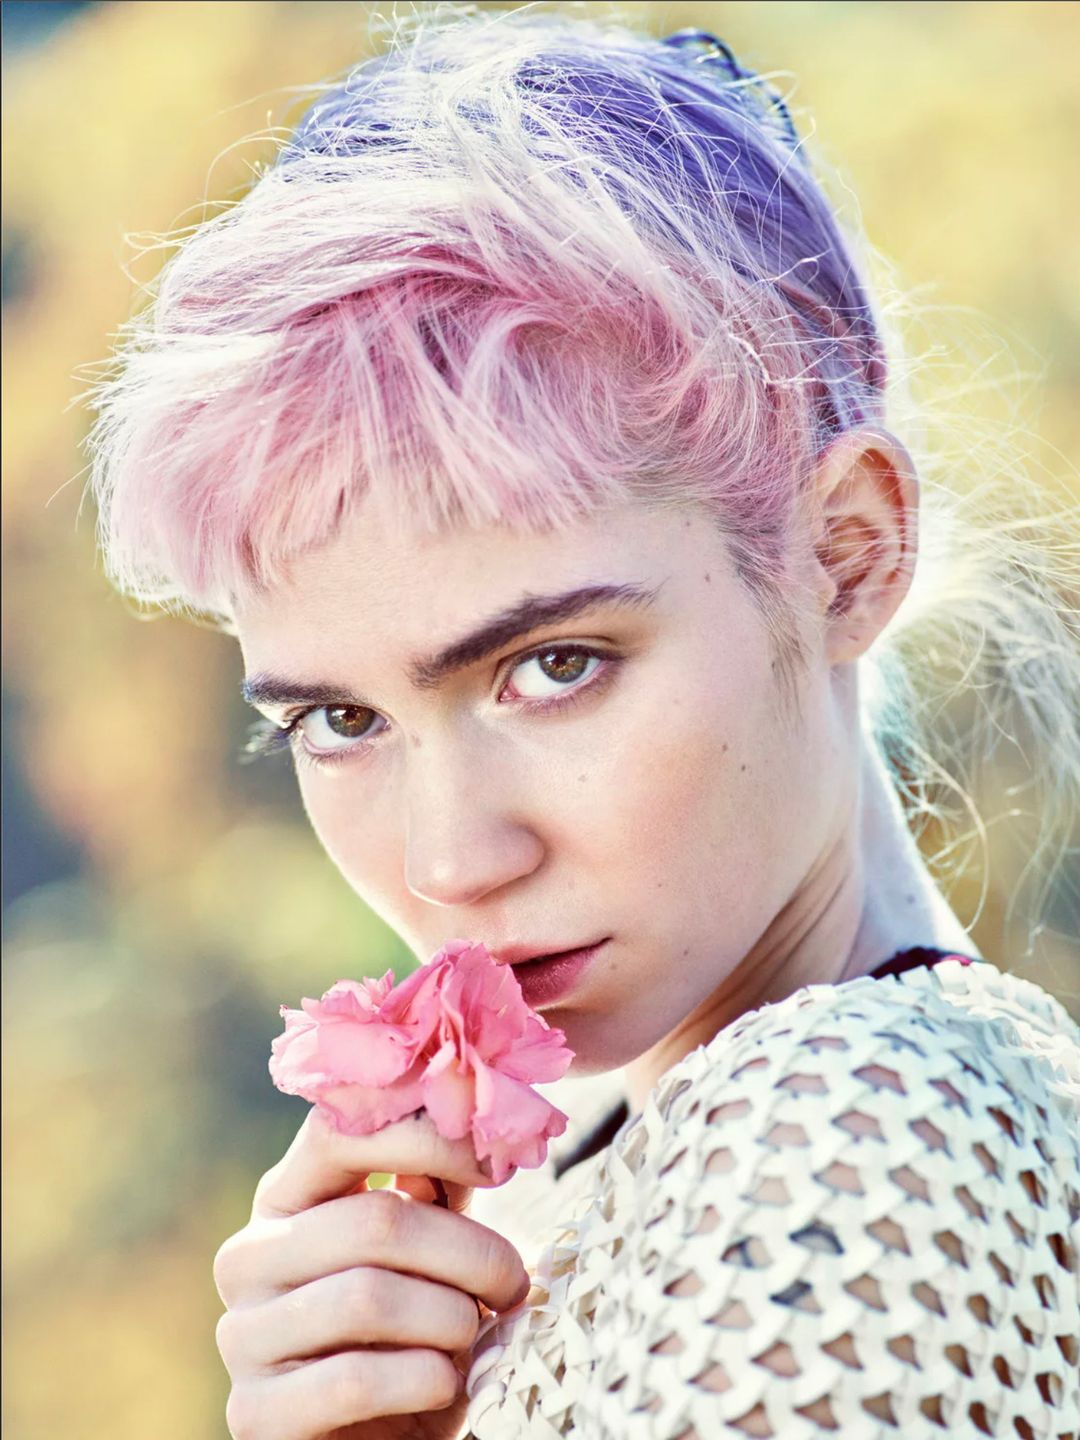 Grimes dating history